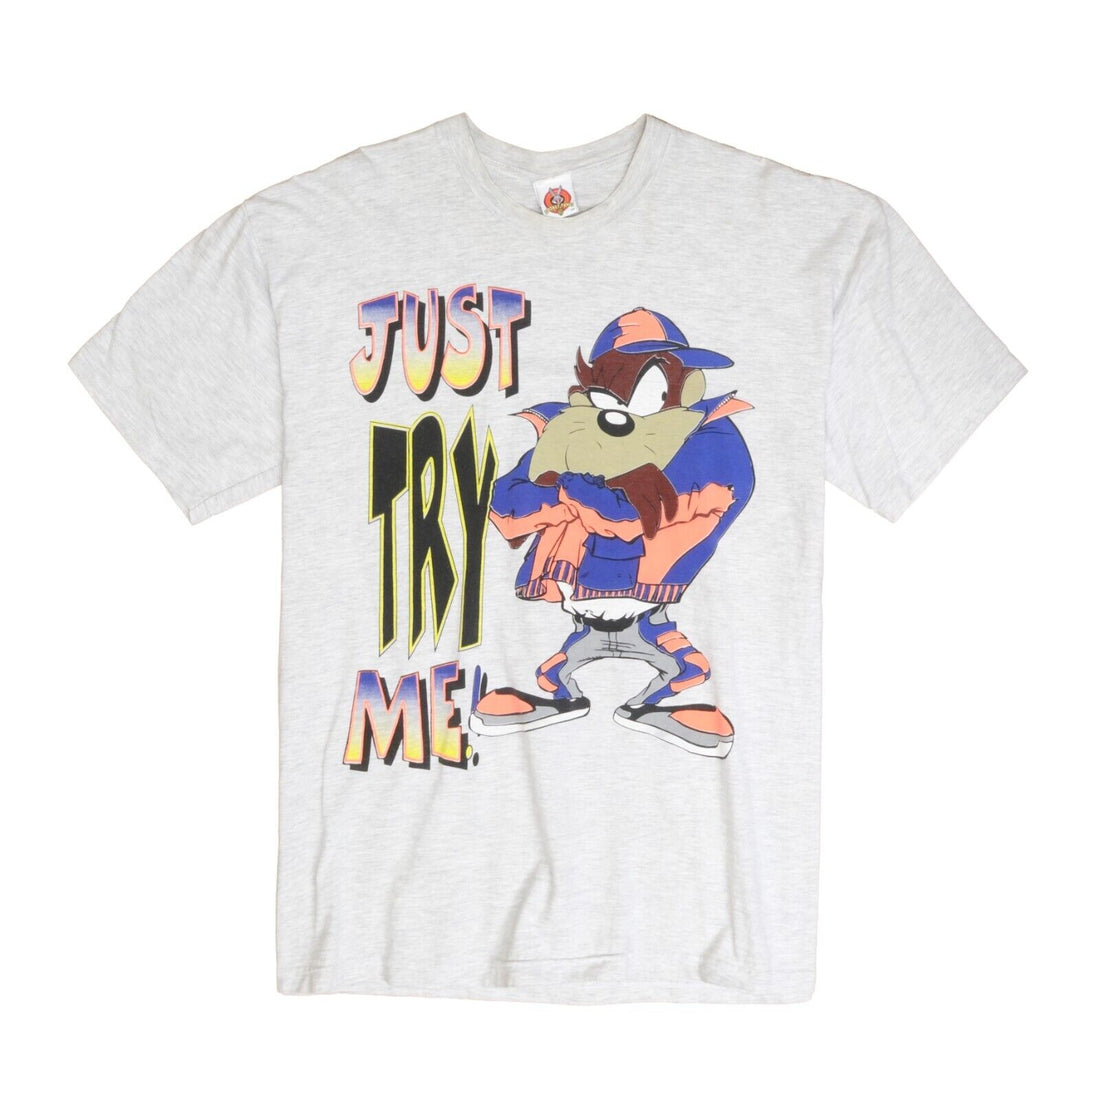 Vintage Taz Just Try Me Looney Tunes T-Shirt Size Large Cartoon 1997 90s